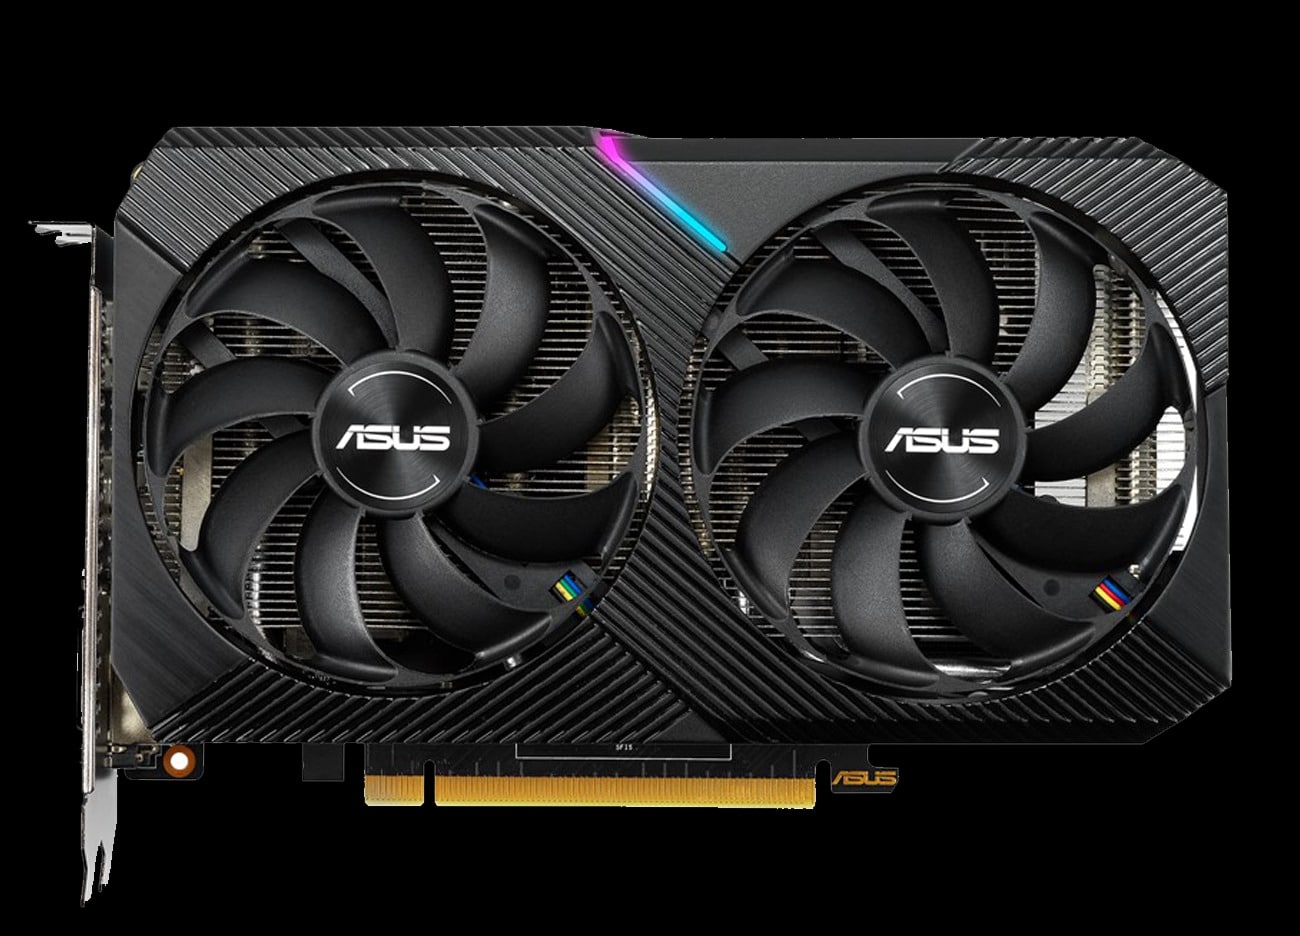 Selv tak Tutor Delvis ASUS DUAL RTX 2070 MINI OC Video Card Review - The FPS Review